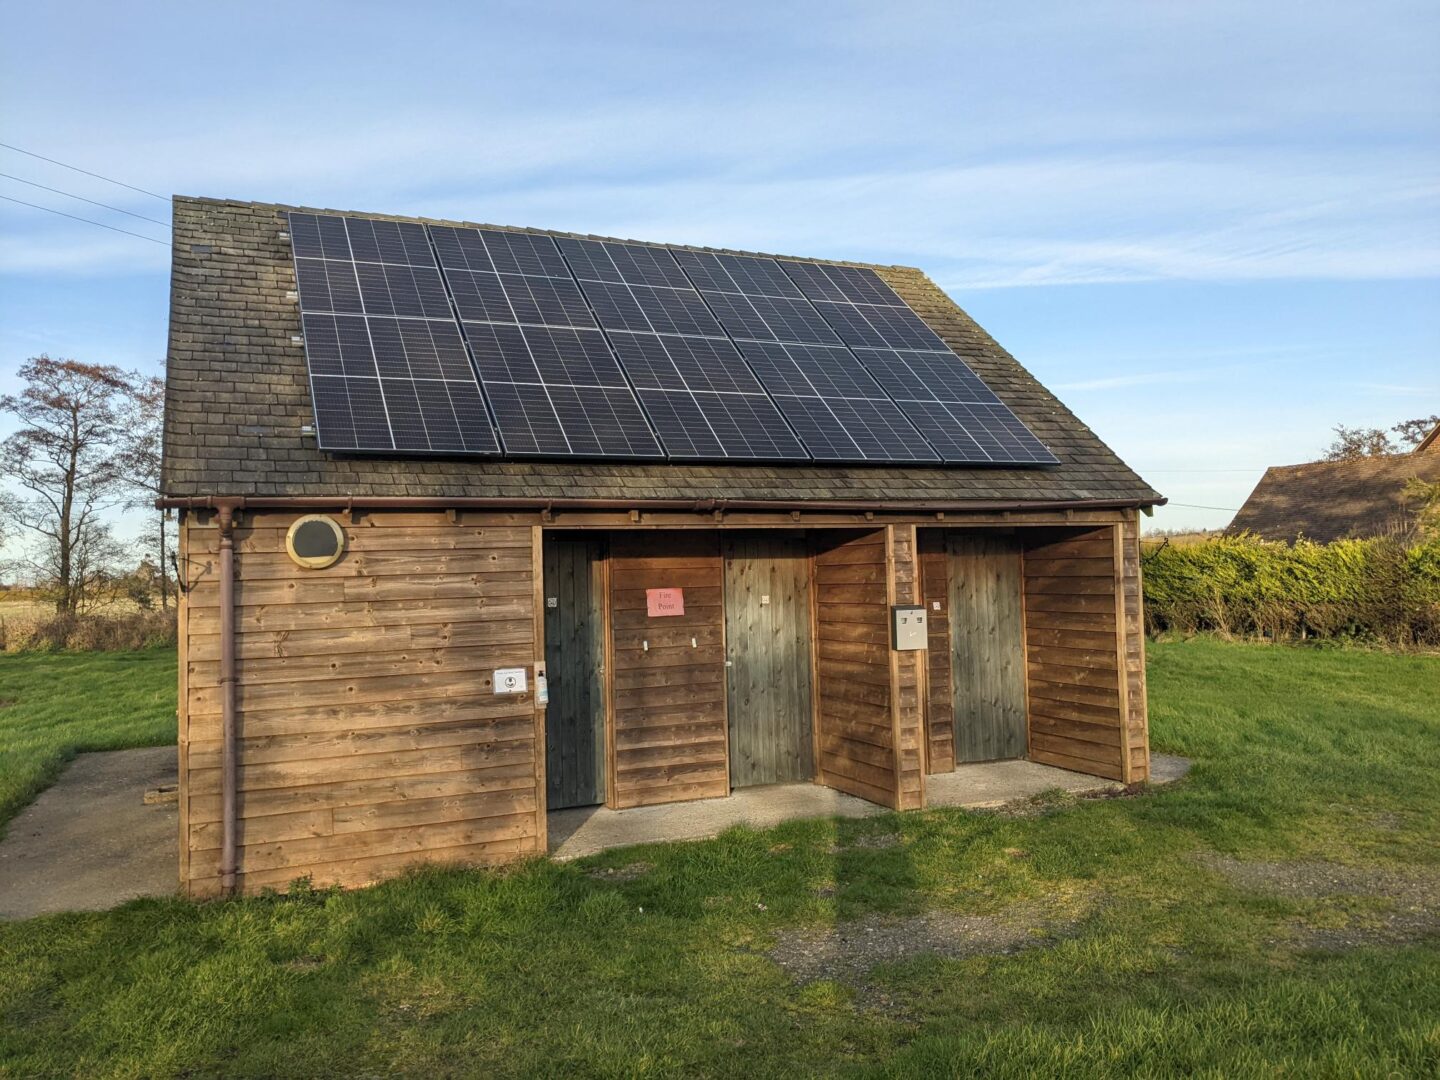 the farm hostel with solar panels on the roof